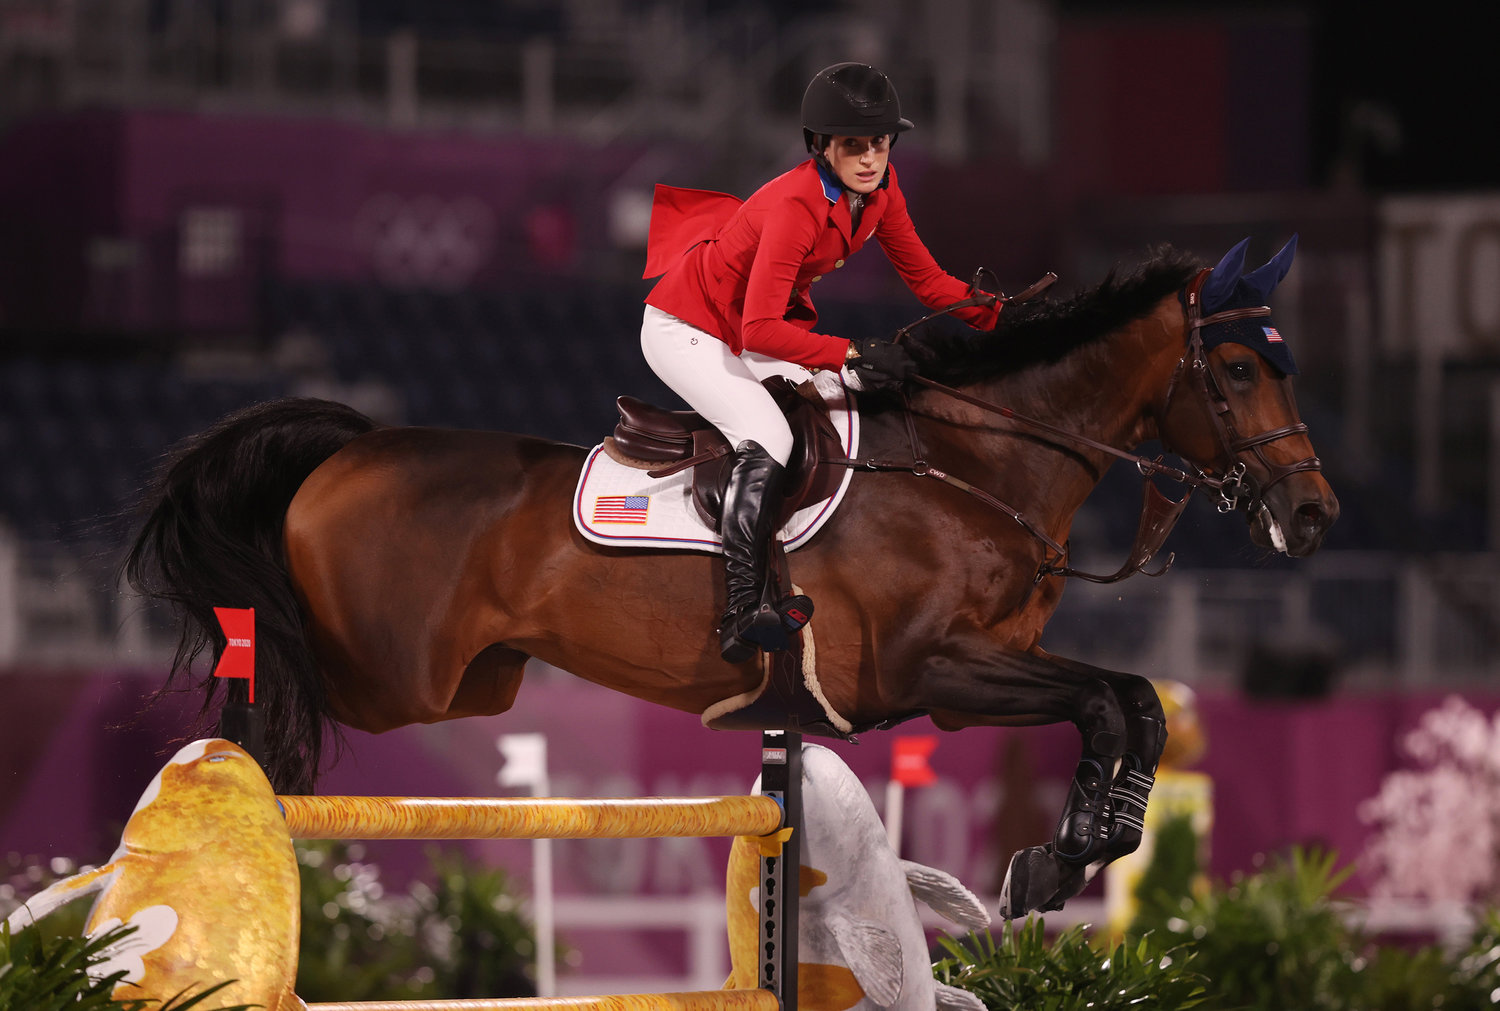 Jessica Springsteen of Team United States, riding Don Juan Van De Donkhoeve, competes during the Jumping Individual Qualifier on day 11 of the Tokyo 2020 Olympic Games at Equestrian Park on Tuesday, Aug. 3, 2021 in Tokyo, Japan.